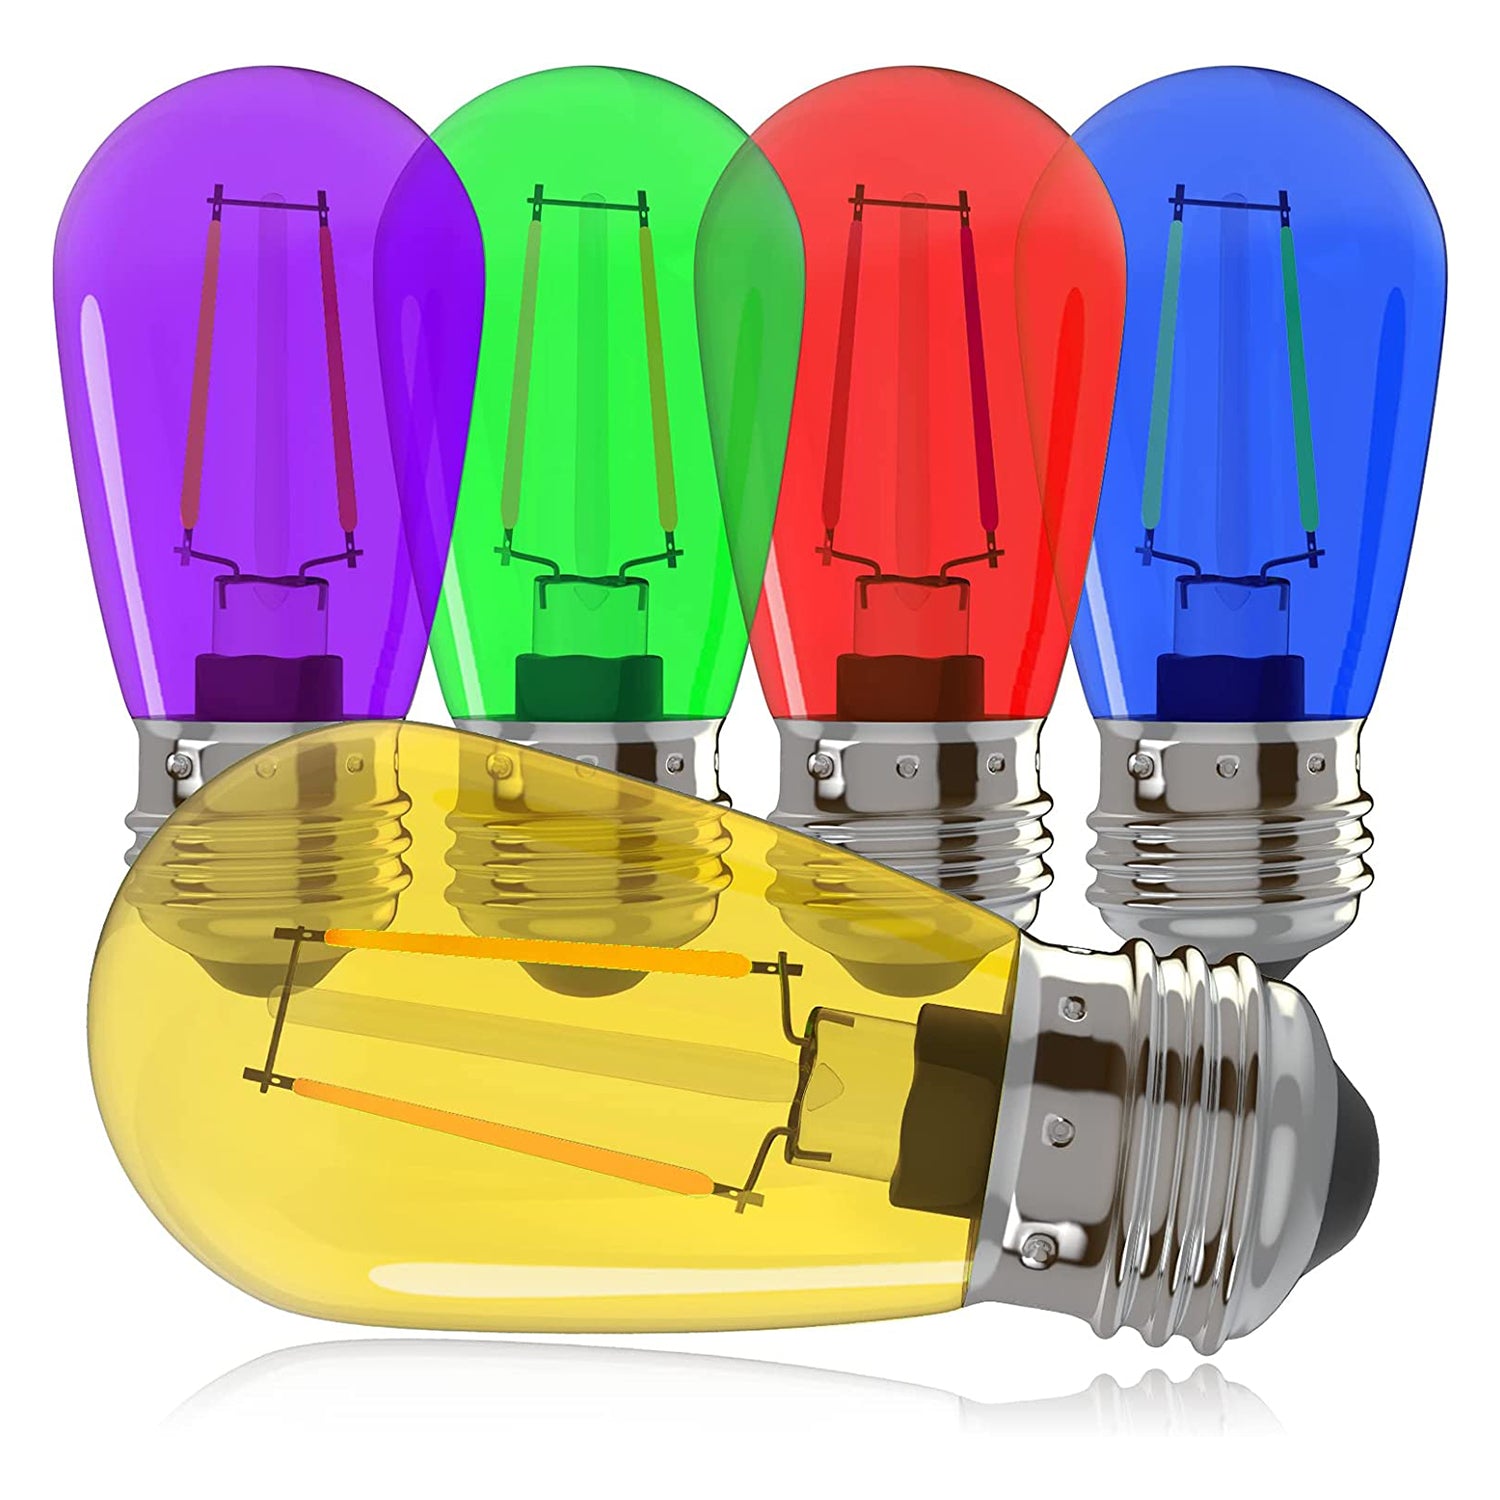 Banord Colored 2W S14 Replacement LED Bulbs, 5 Pack 2700K Dimmable RGB Bulbs Outdoor String Lights Vintage Filament LED Edison Light Bulb, Waterproof & Shatterproof E26 Screw Base Multicolor Bulbs